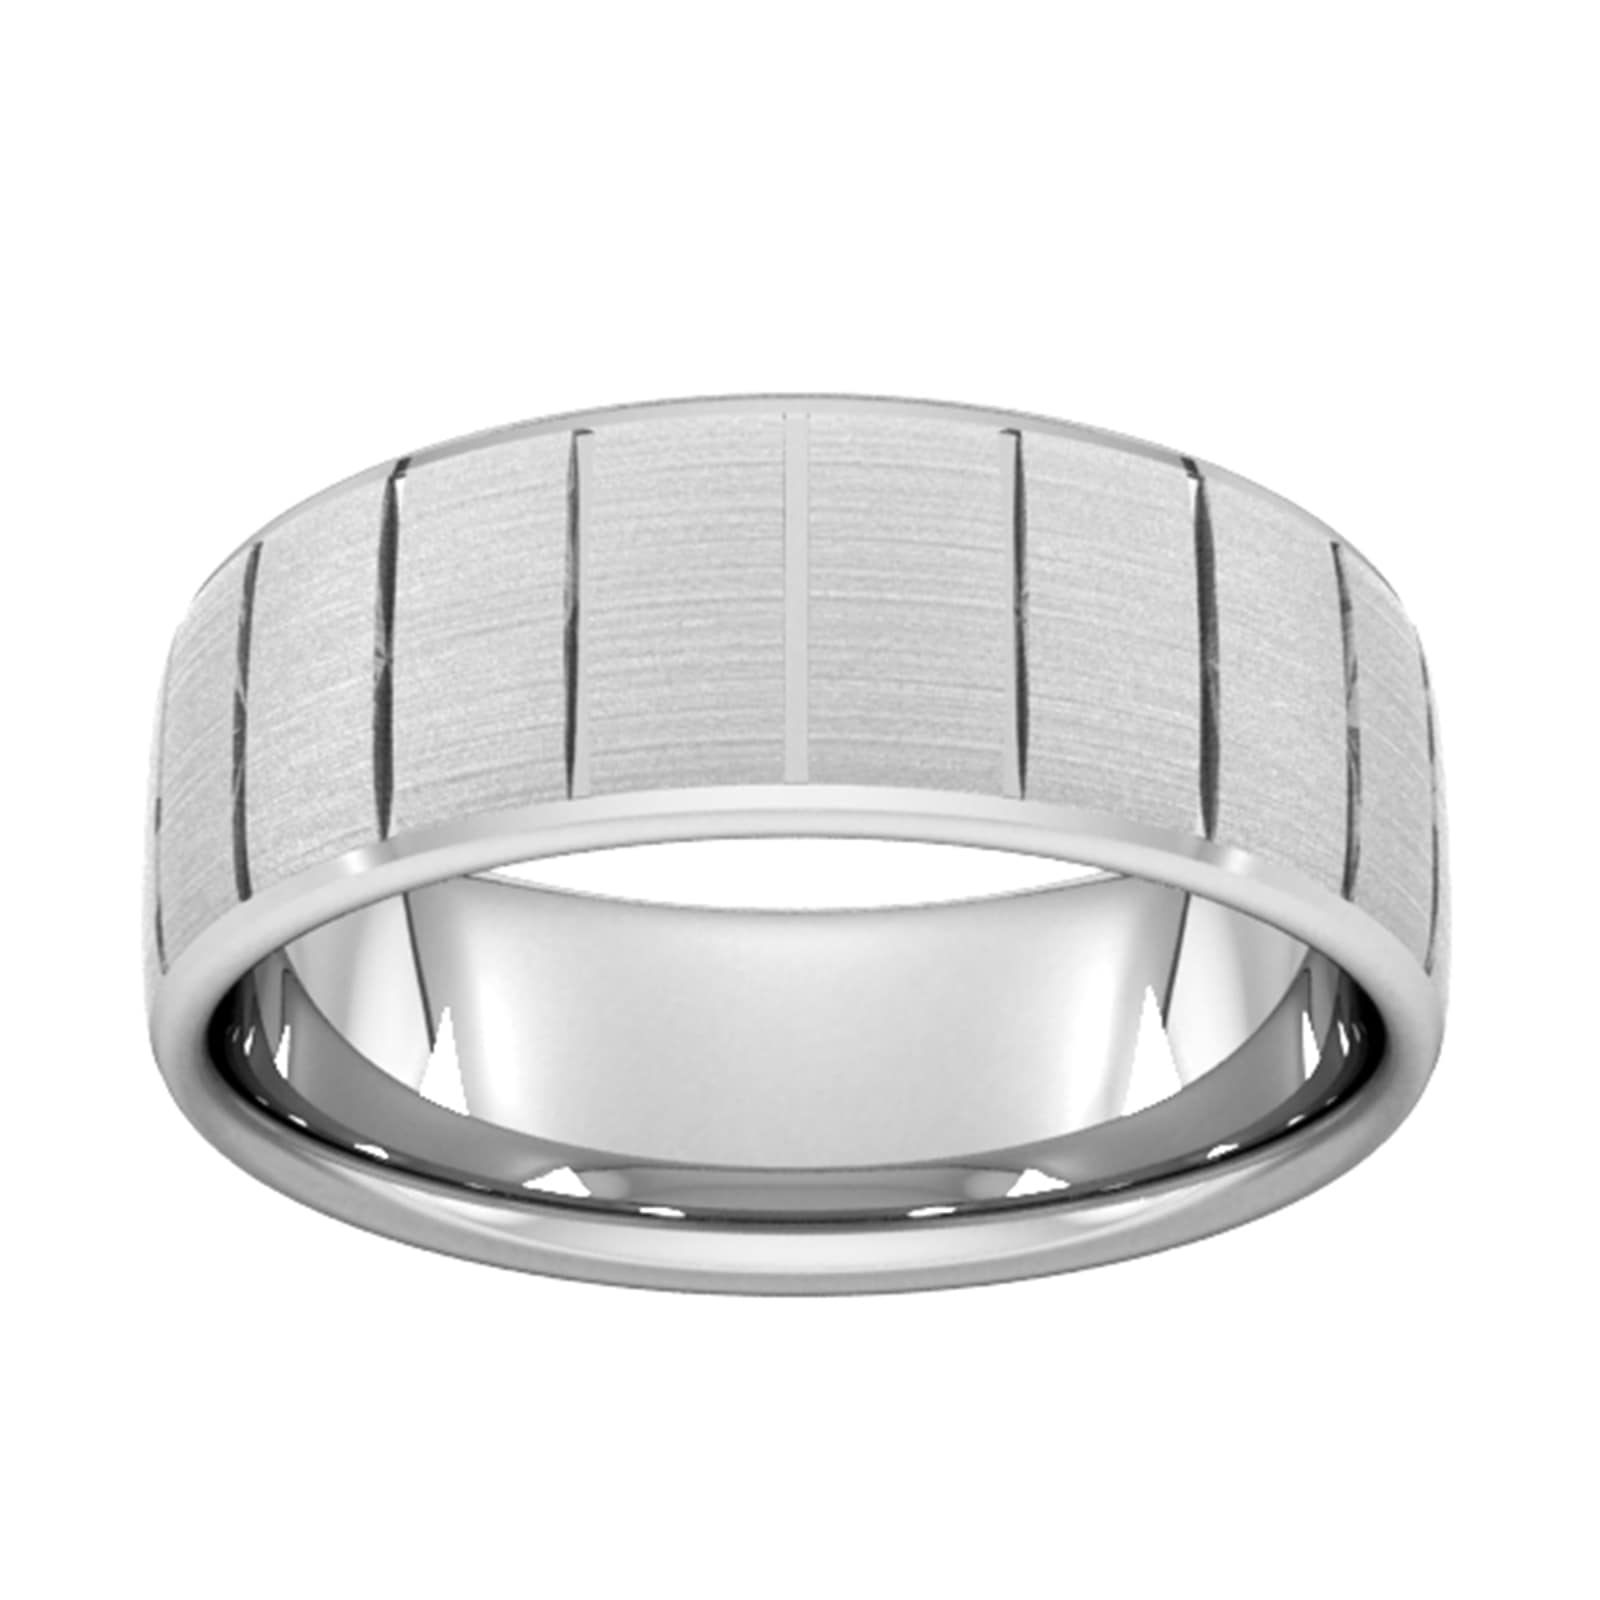 8mm Slight Court Heavy Vertical Lines Wedding Ring In 9 Carat White Gold - Ring Size N